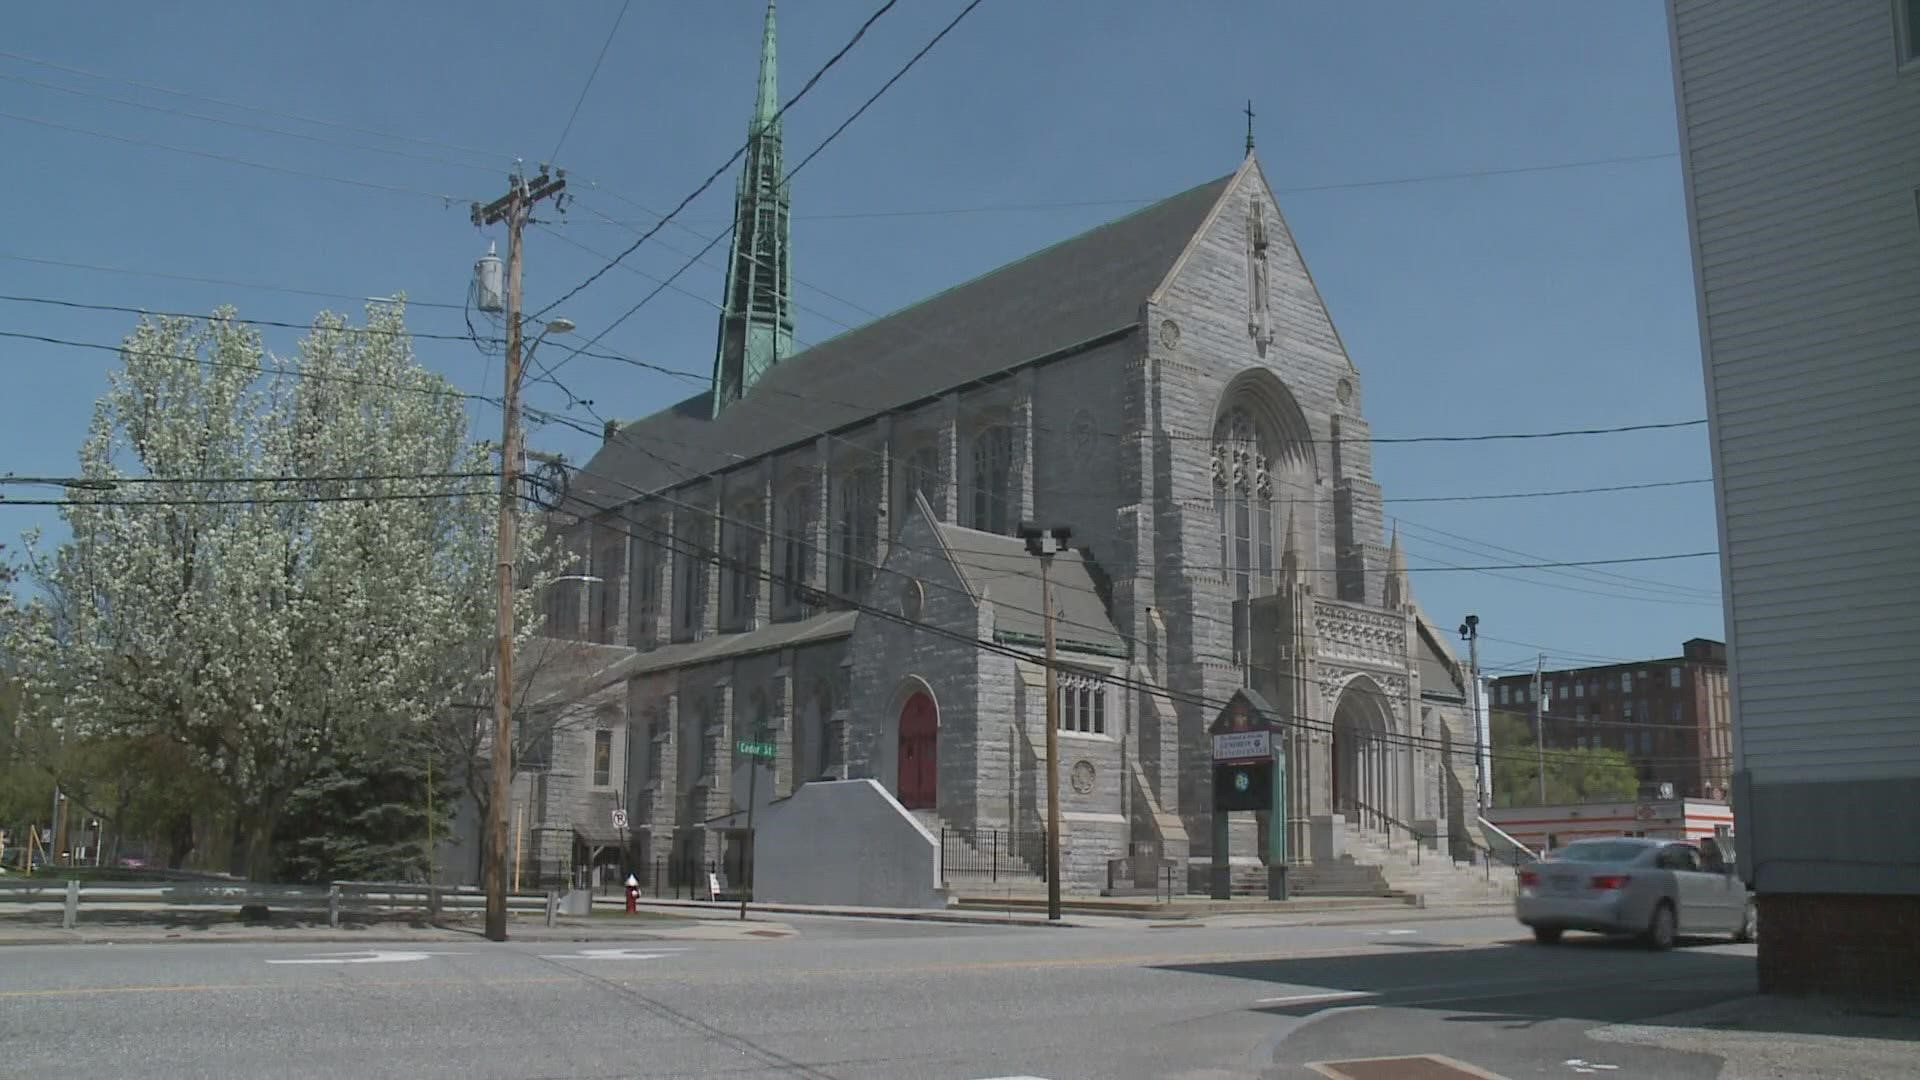 The goal is to save the historic building, which is the former St. Mary's Church and is almost 100 years old